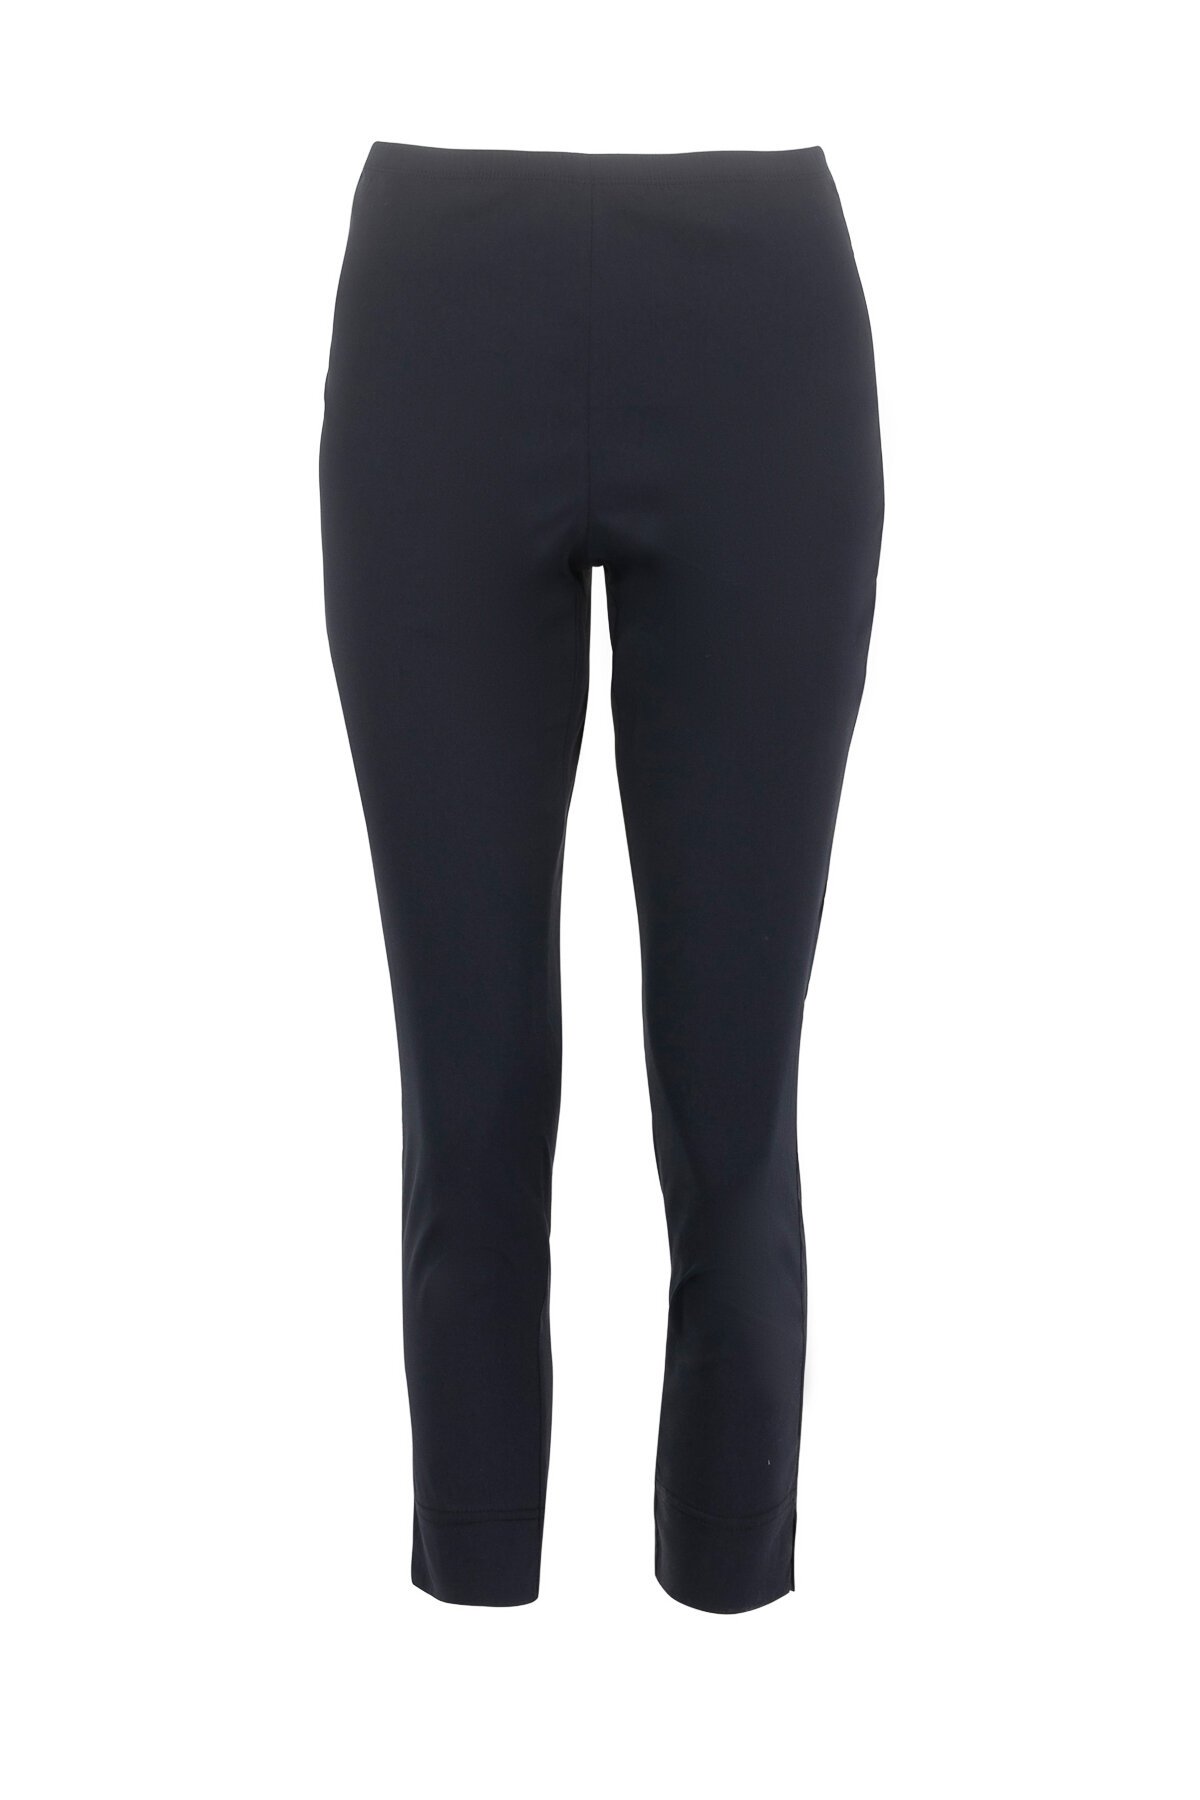 Verge Acrobat Eclipse Pant Pants Mainly Casual Womens Clothing Stocking Your Favourite 